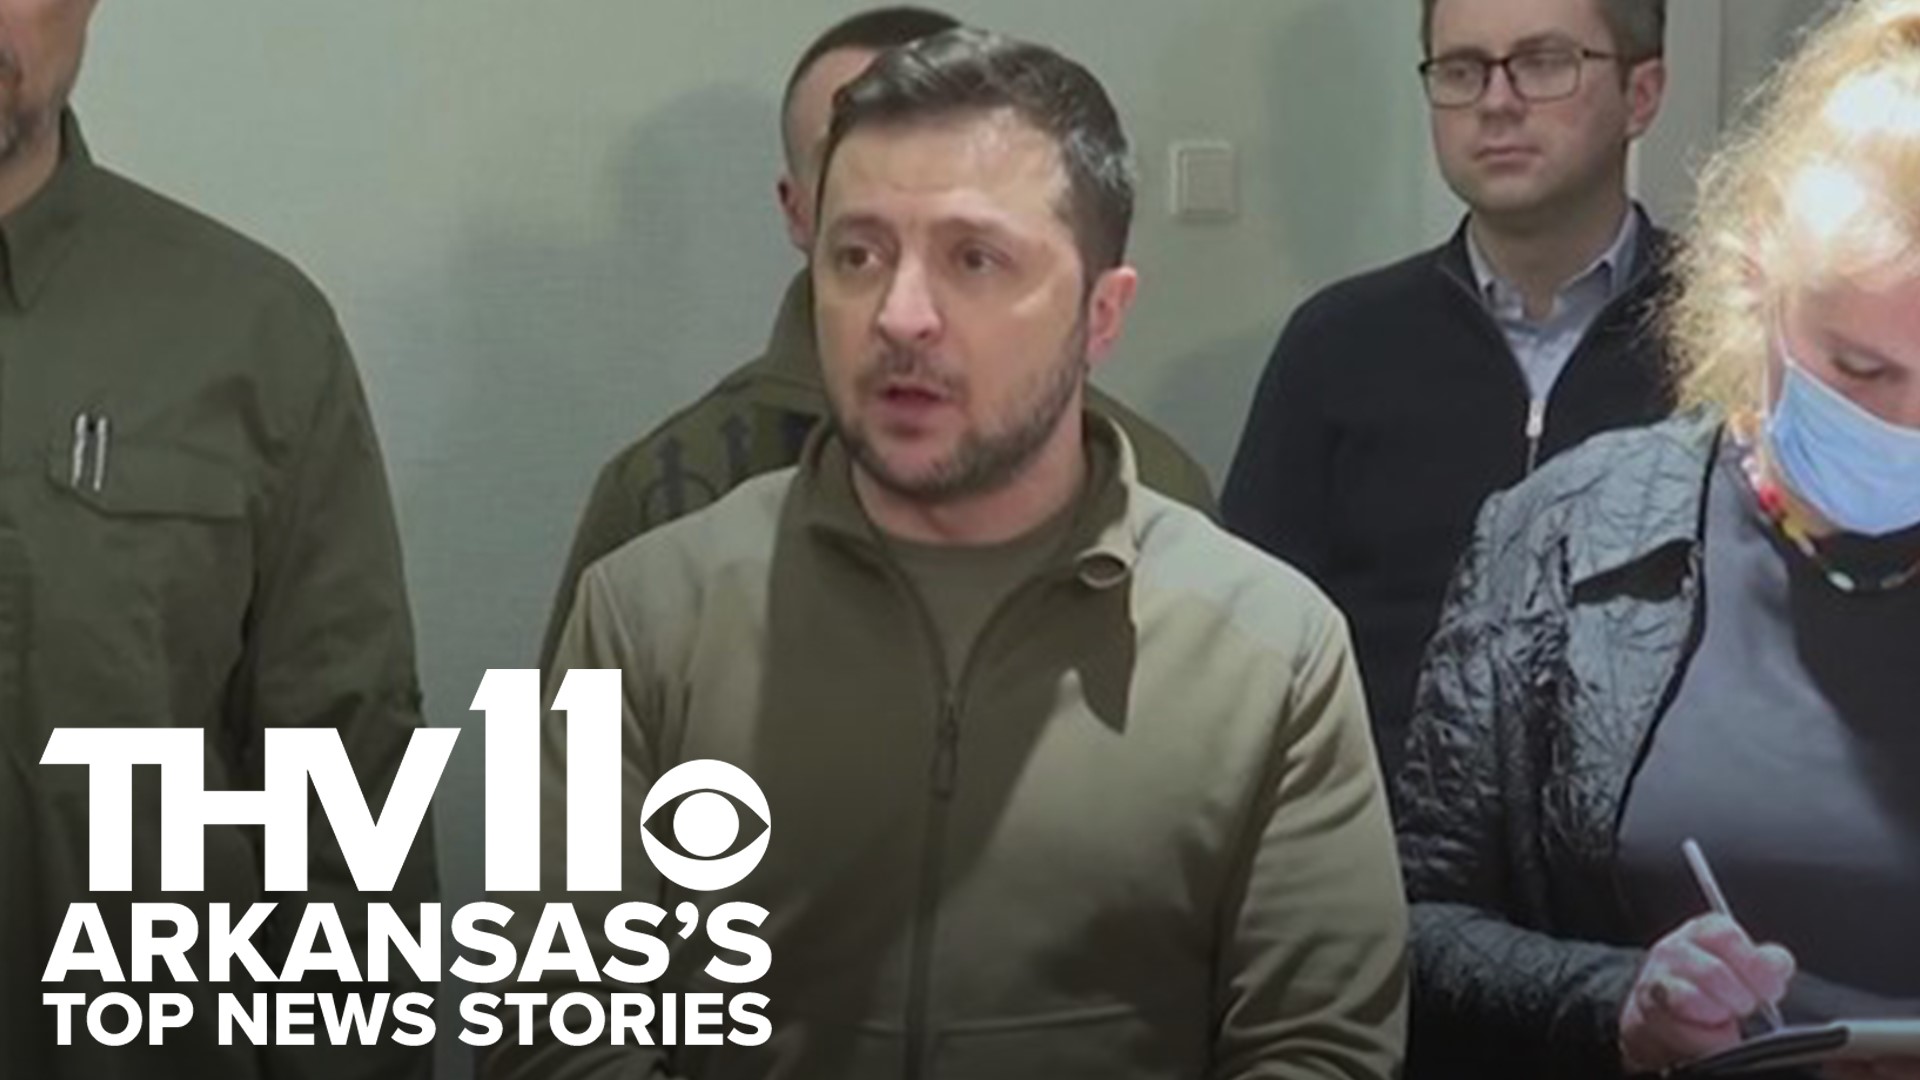 Wake Up Central shares the top news stories across Arkansas, including the Ukrainian president's message to U.S. lawmakers.